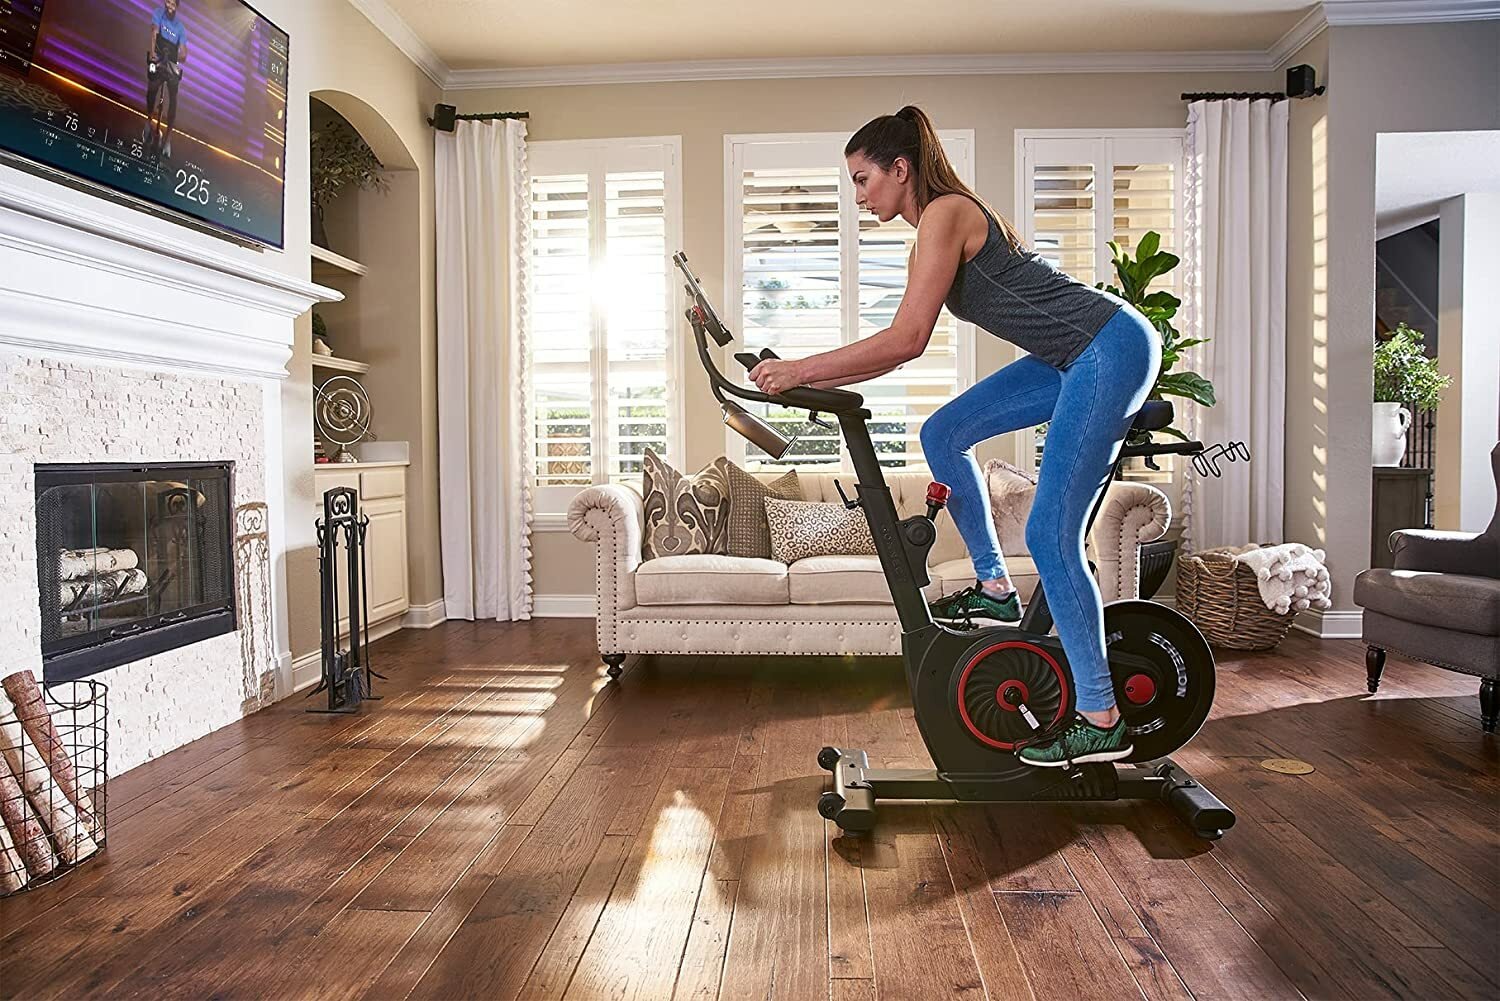 Woman riding Echelon EX5 fitness bike in living room in front of TV playing exercise class.